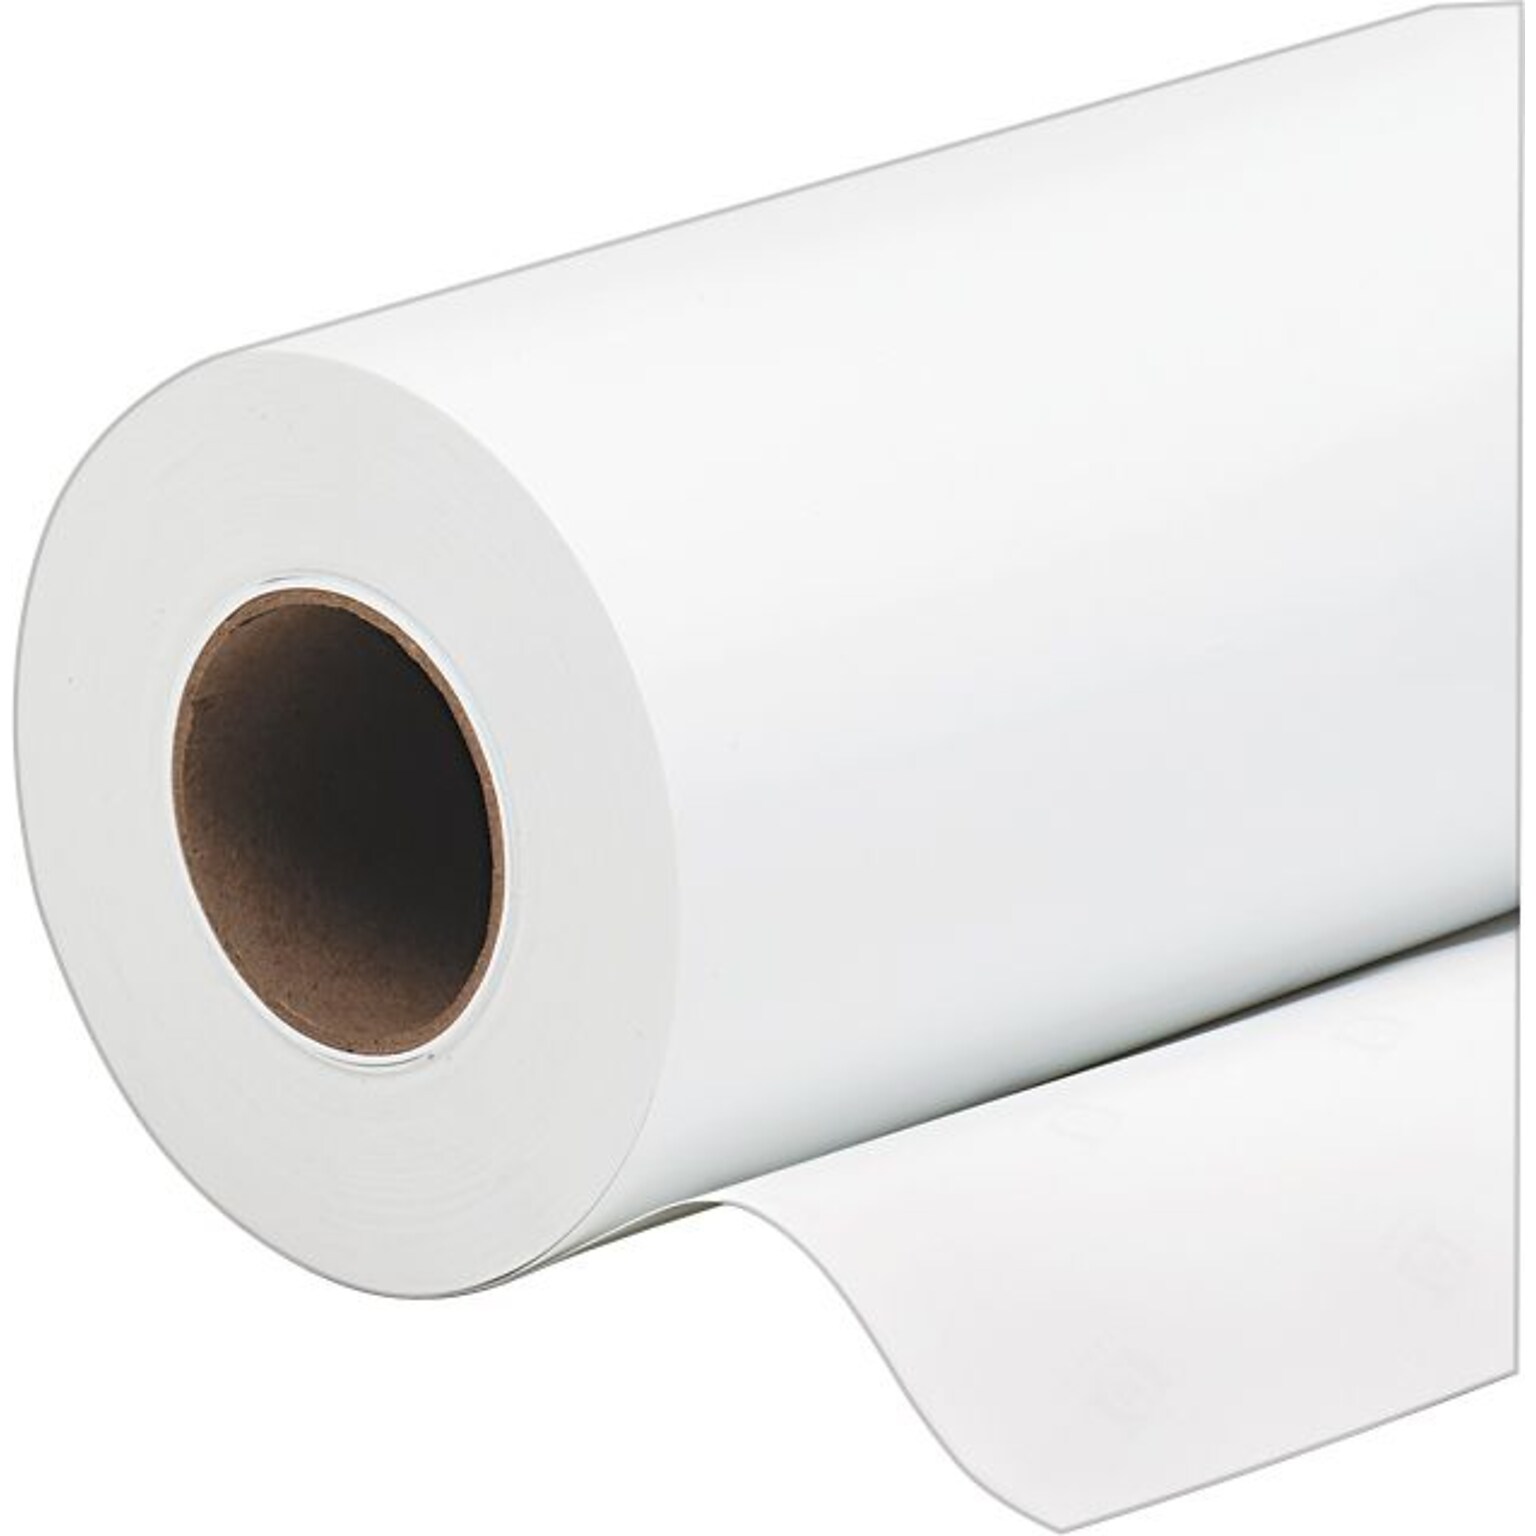 HP Everyday Pigment Ink Satin Photo Paper Wide Format Bond Paper Roll, 42 x 100, Satin Finish (HEWQ8922A)